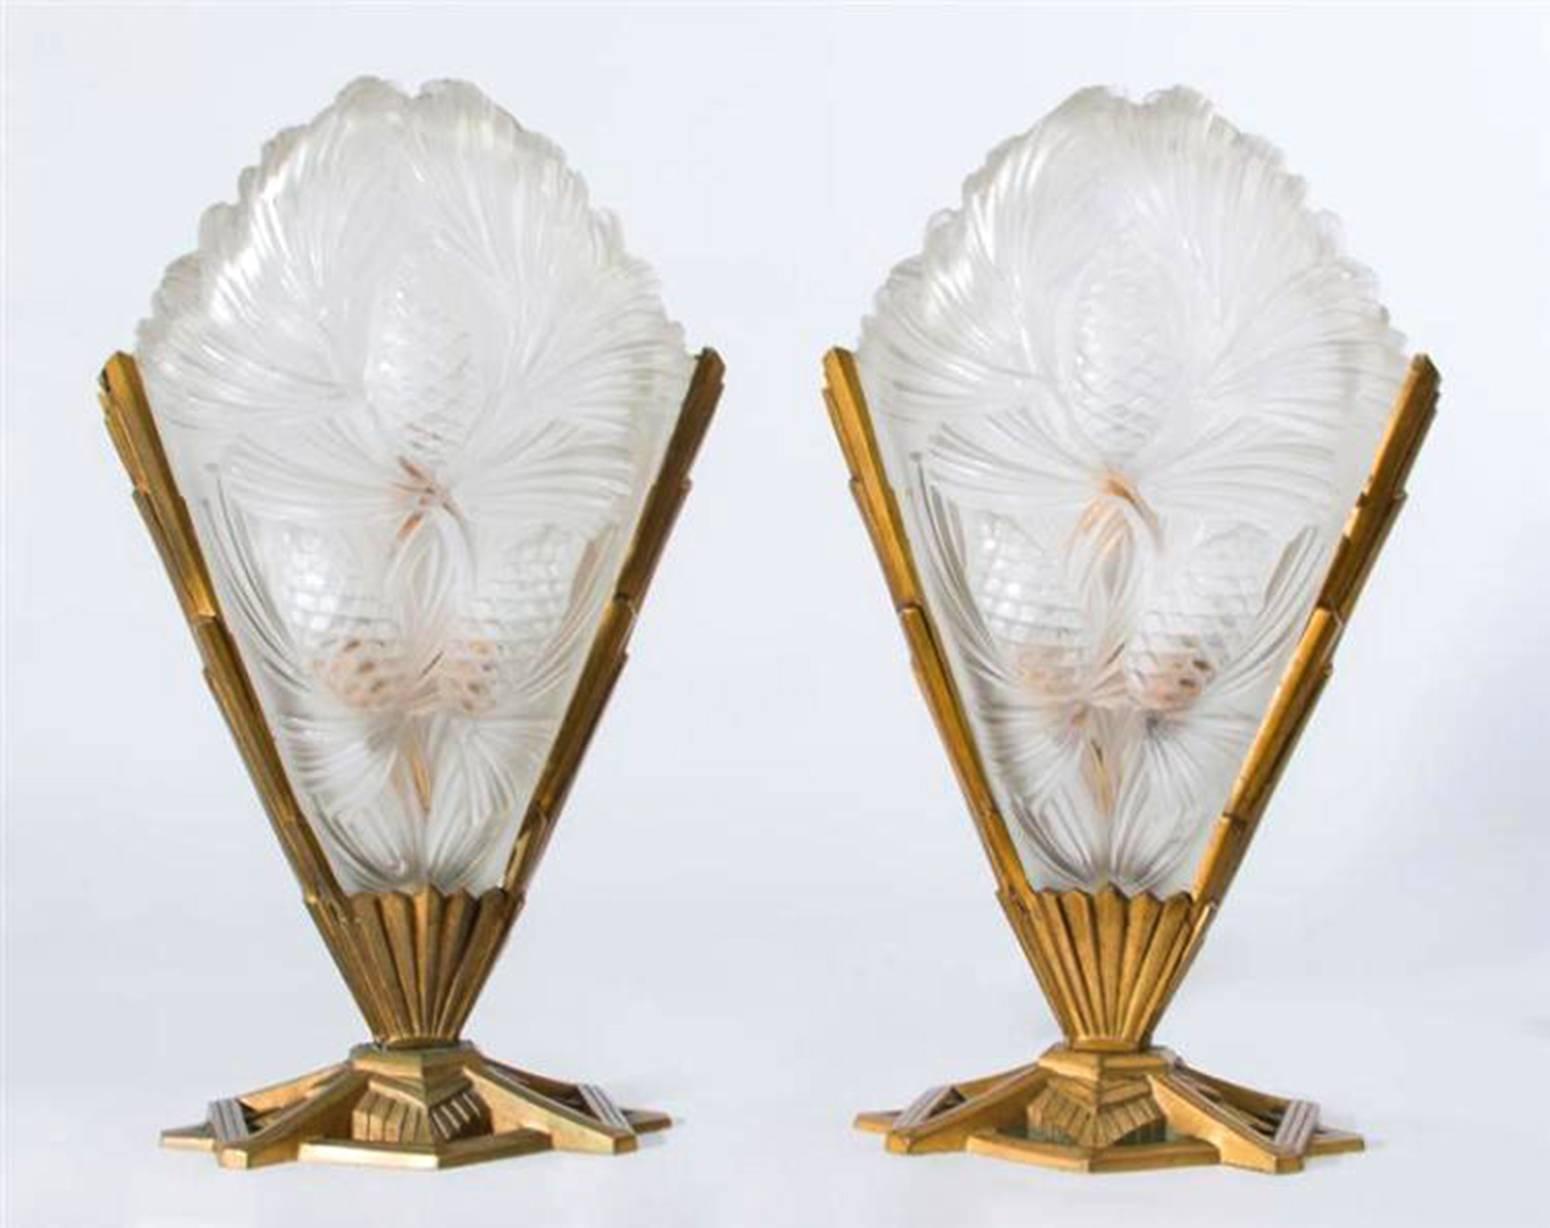 Description: Sabino Paris, Pair of Art Deco Table Lamps 
Molded frosted glass, gilt brass 
Signed by Sabino on the Glass
Dimensions: 18 x 10 x 6 in.

Signed &quot;SABINO PARIS&quot; 